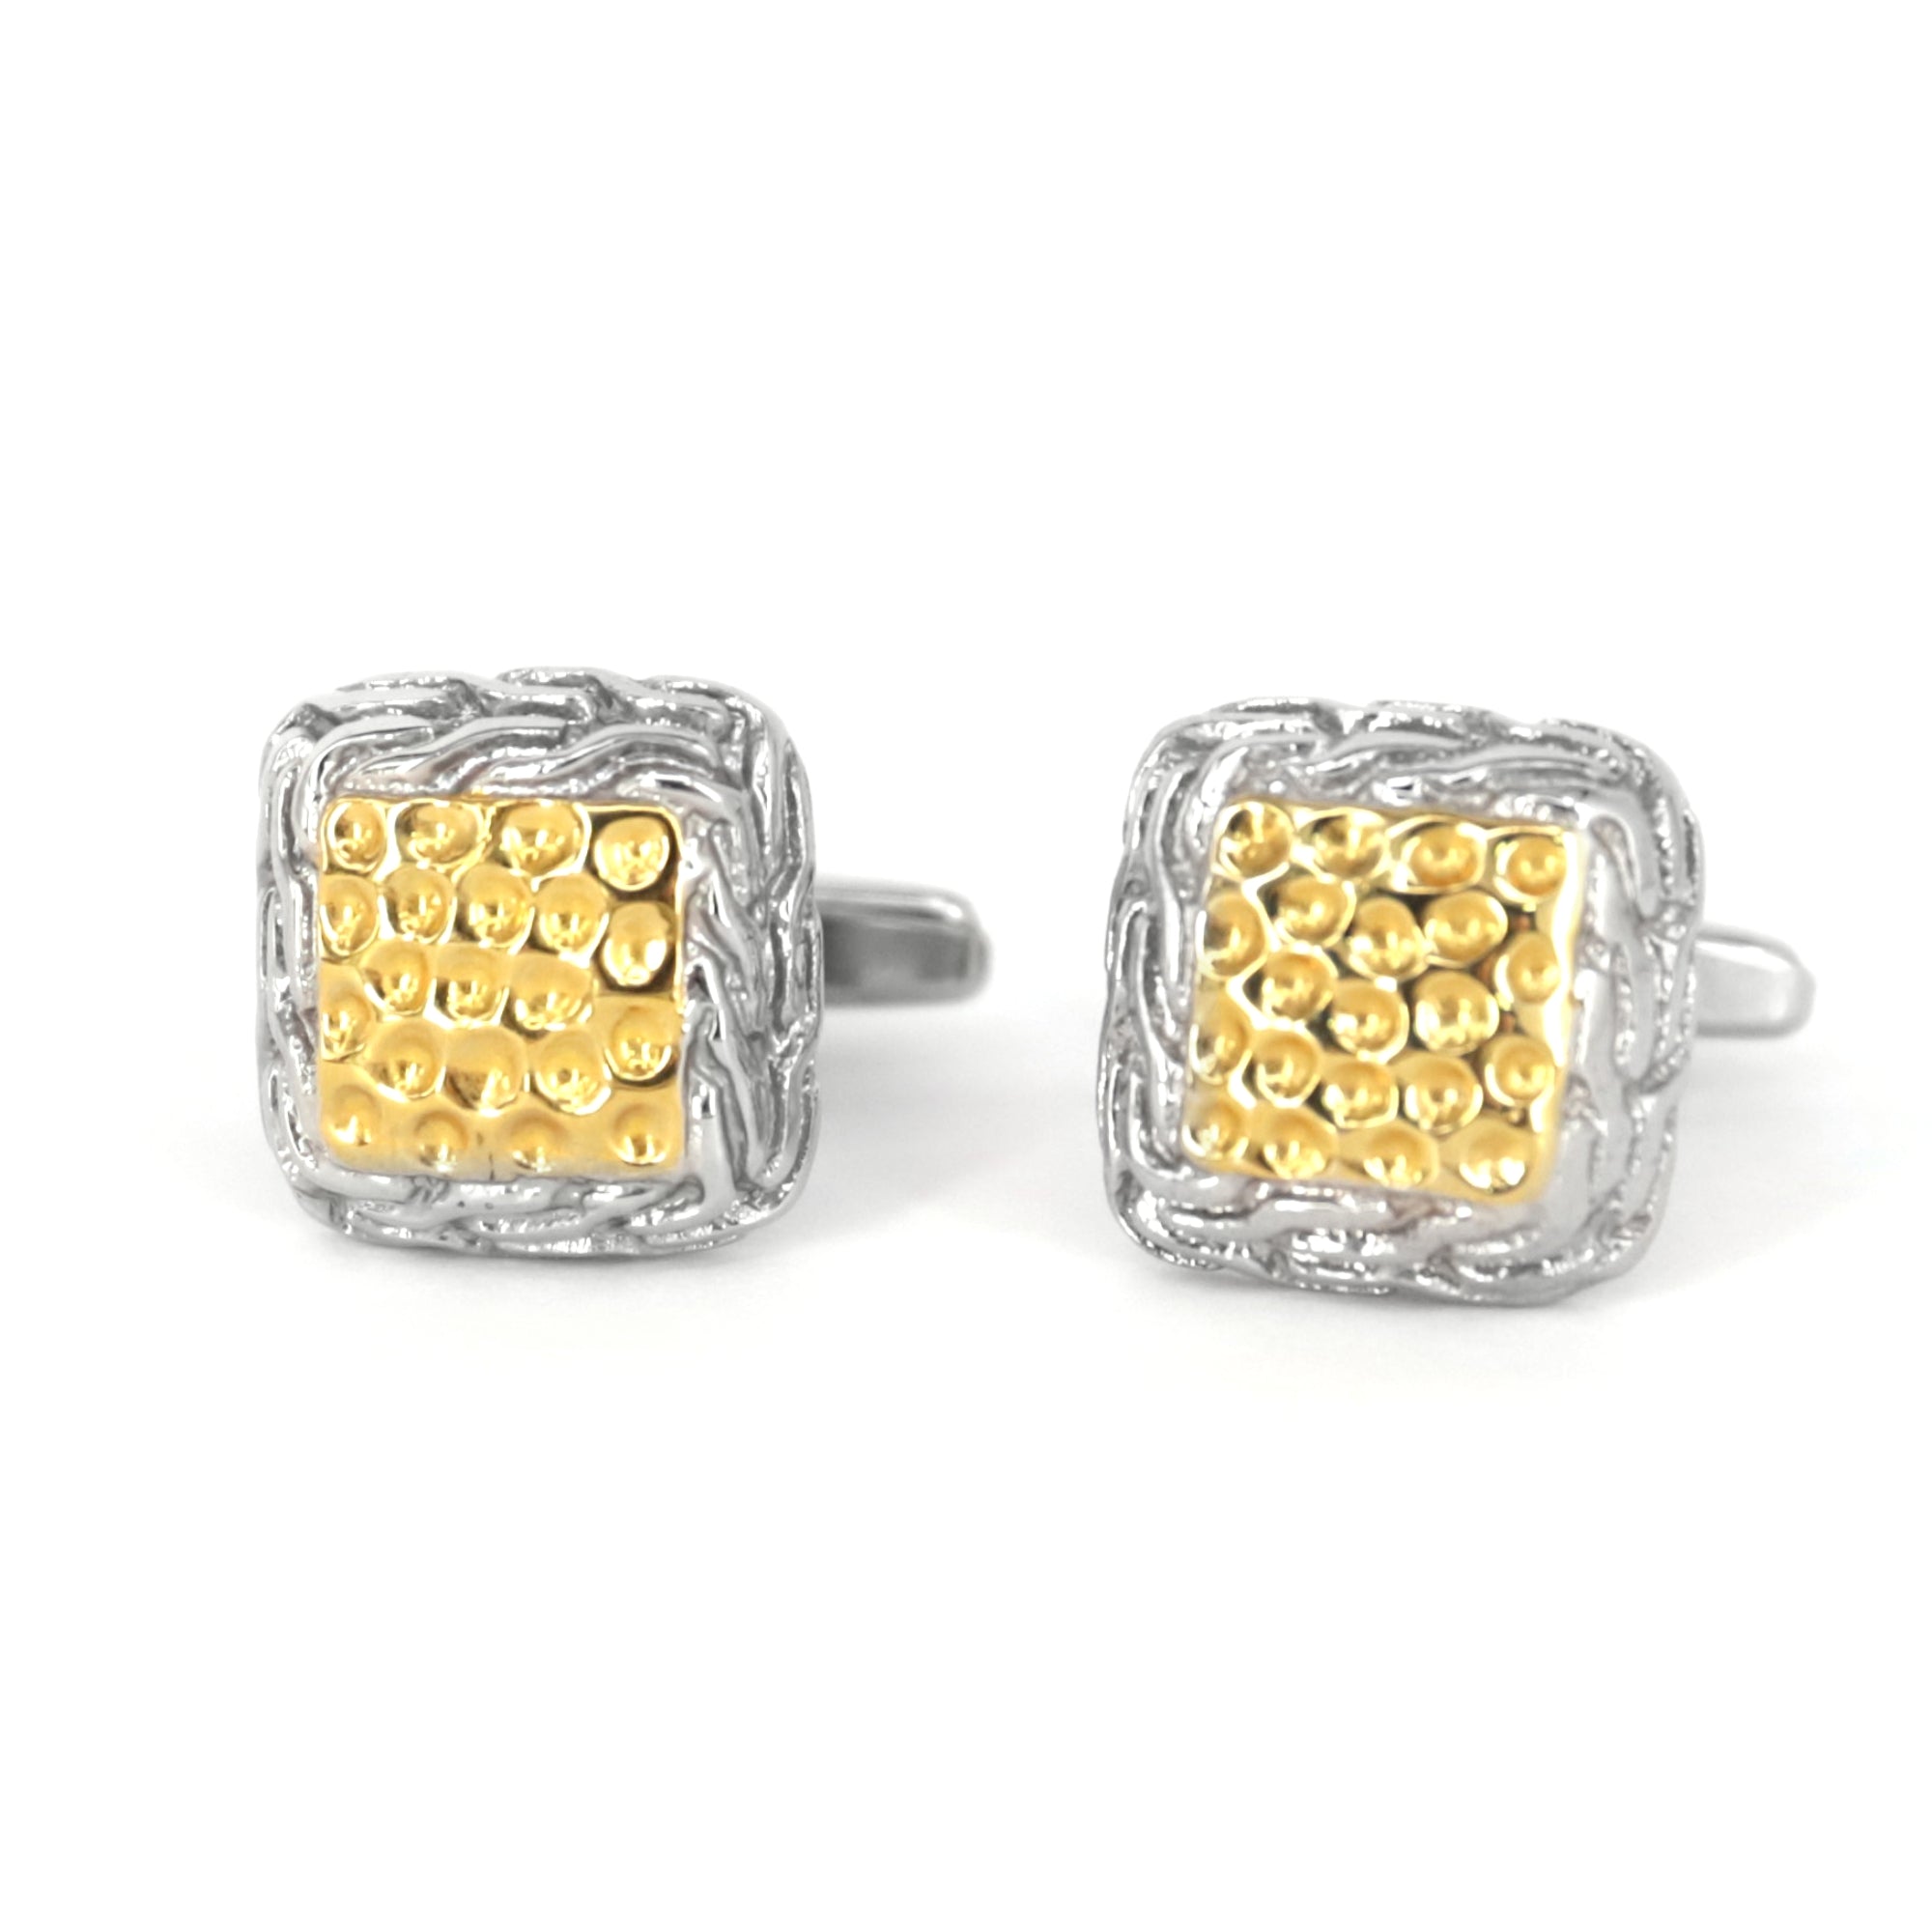 Silver Square Cufflinks with Gold